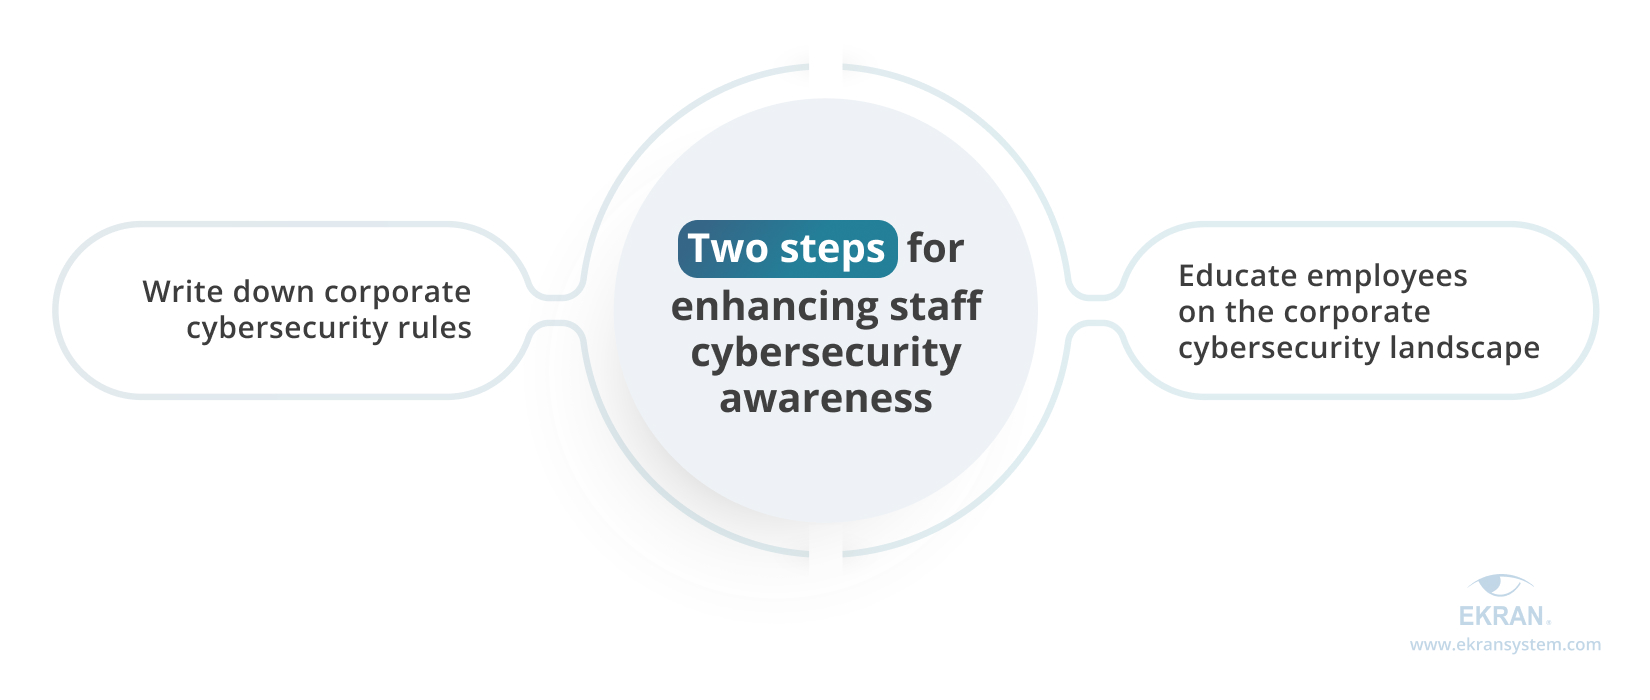 Two steps for enhancing staff cybersecurity awareness